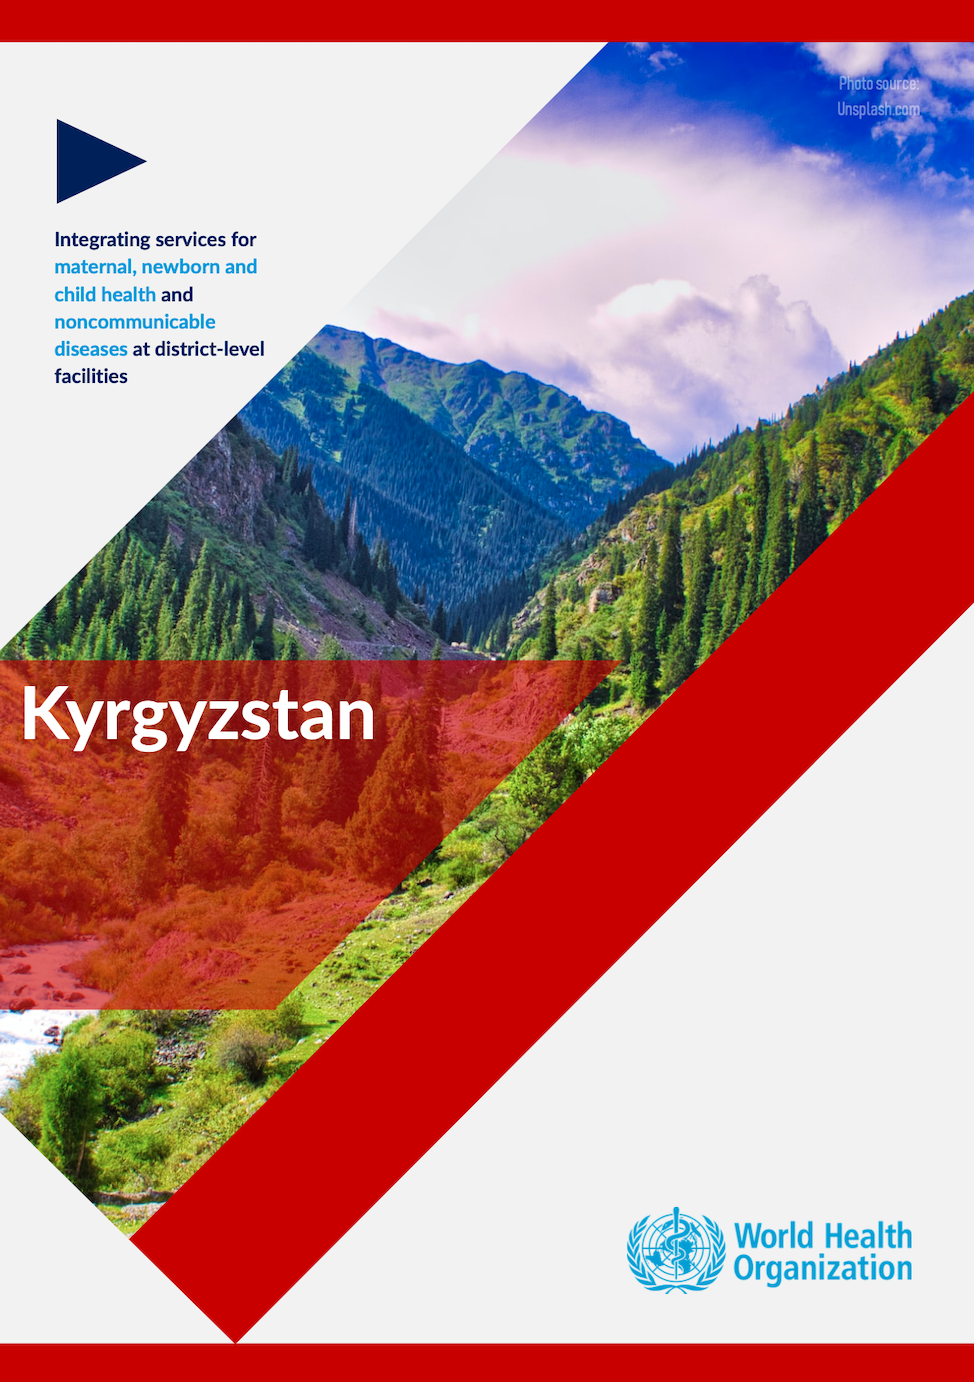 Integrating services for maternal, newborn and child health and noncommunicable diseases at district-level facilities: Kyrgyzstan